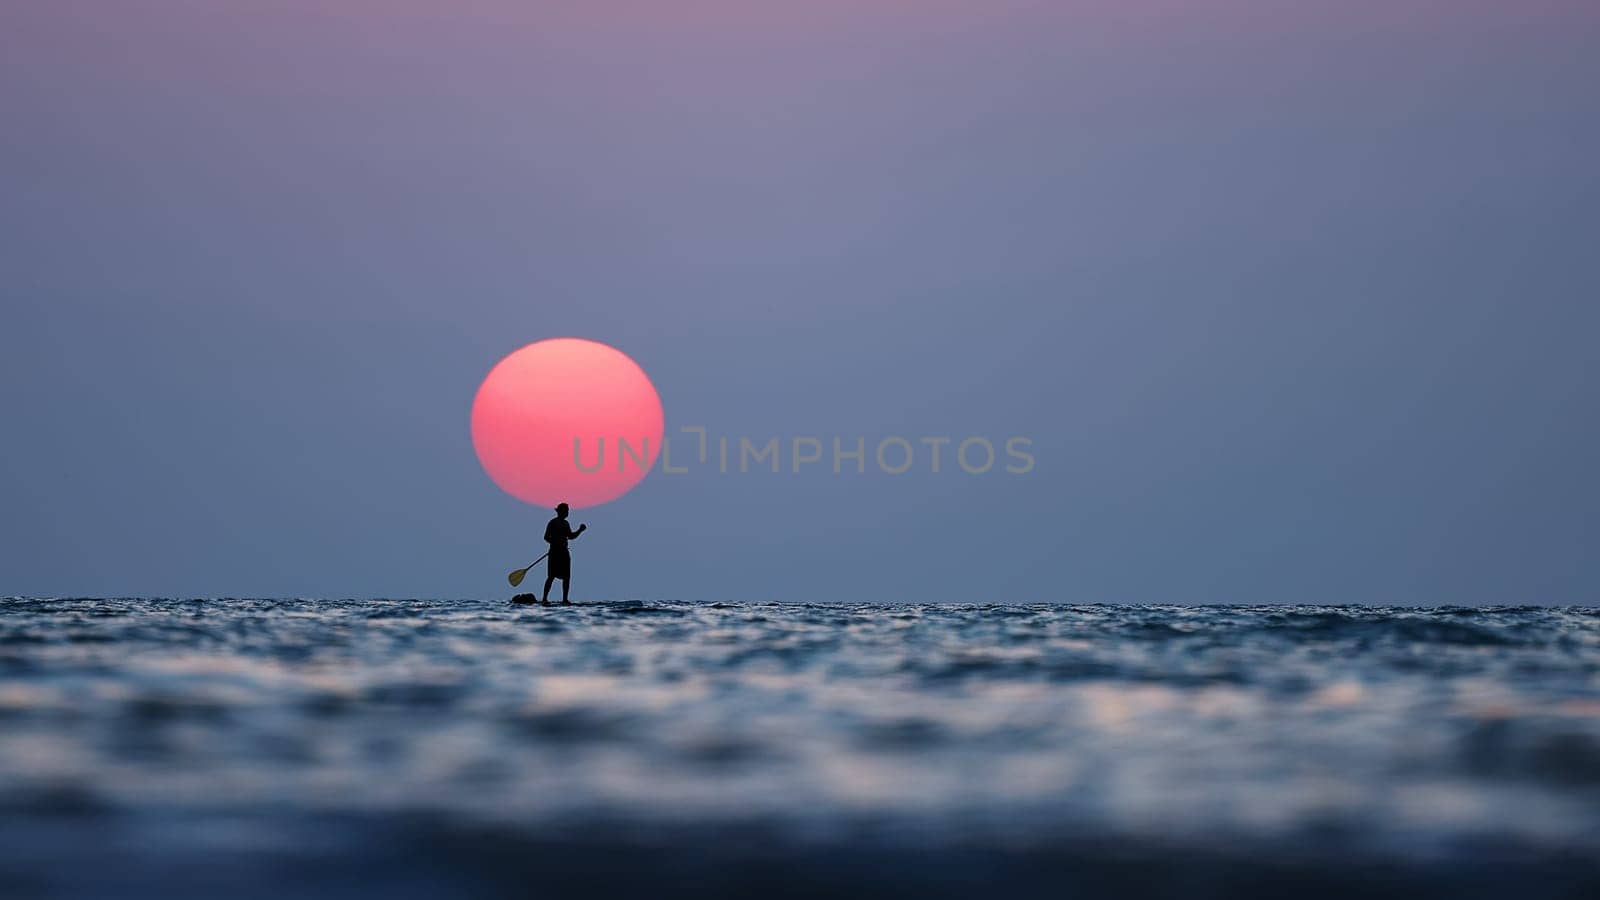 silhouette of a man on the paddleboard against the setting sun. Paddleboard in the sea at sunset, side view . Young man on paddle boarding during a beautiful sunrise. Paddle-boarding by open water.